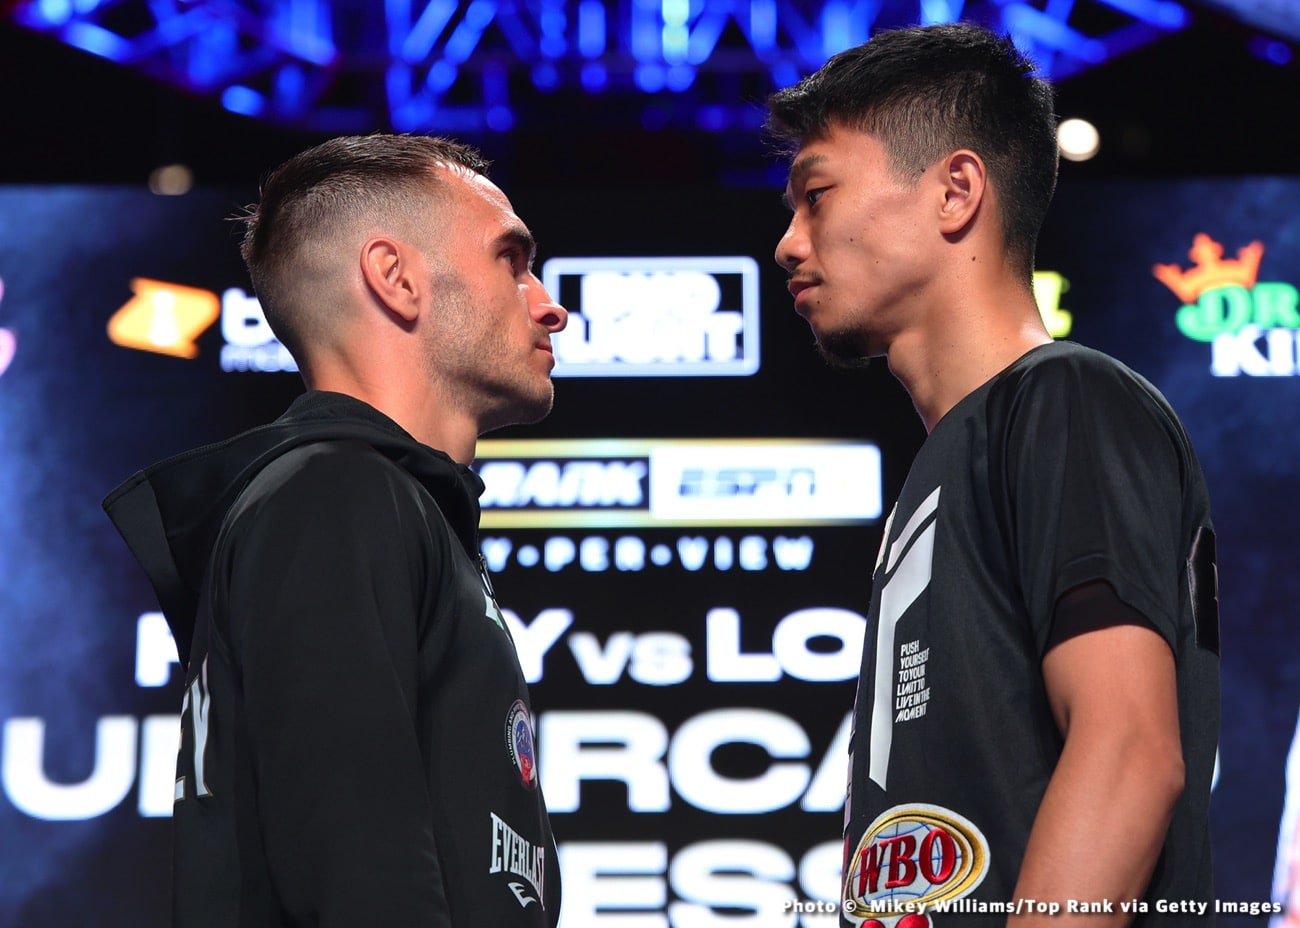 Haney - Lomachenko PPV Undercard Results & Reactions